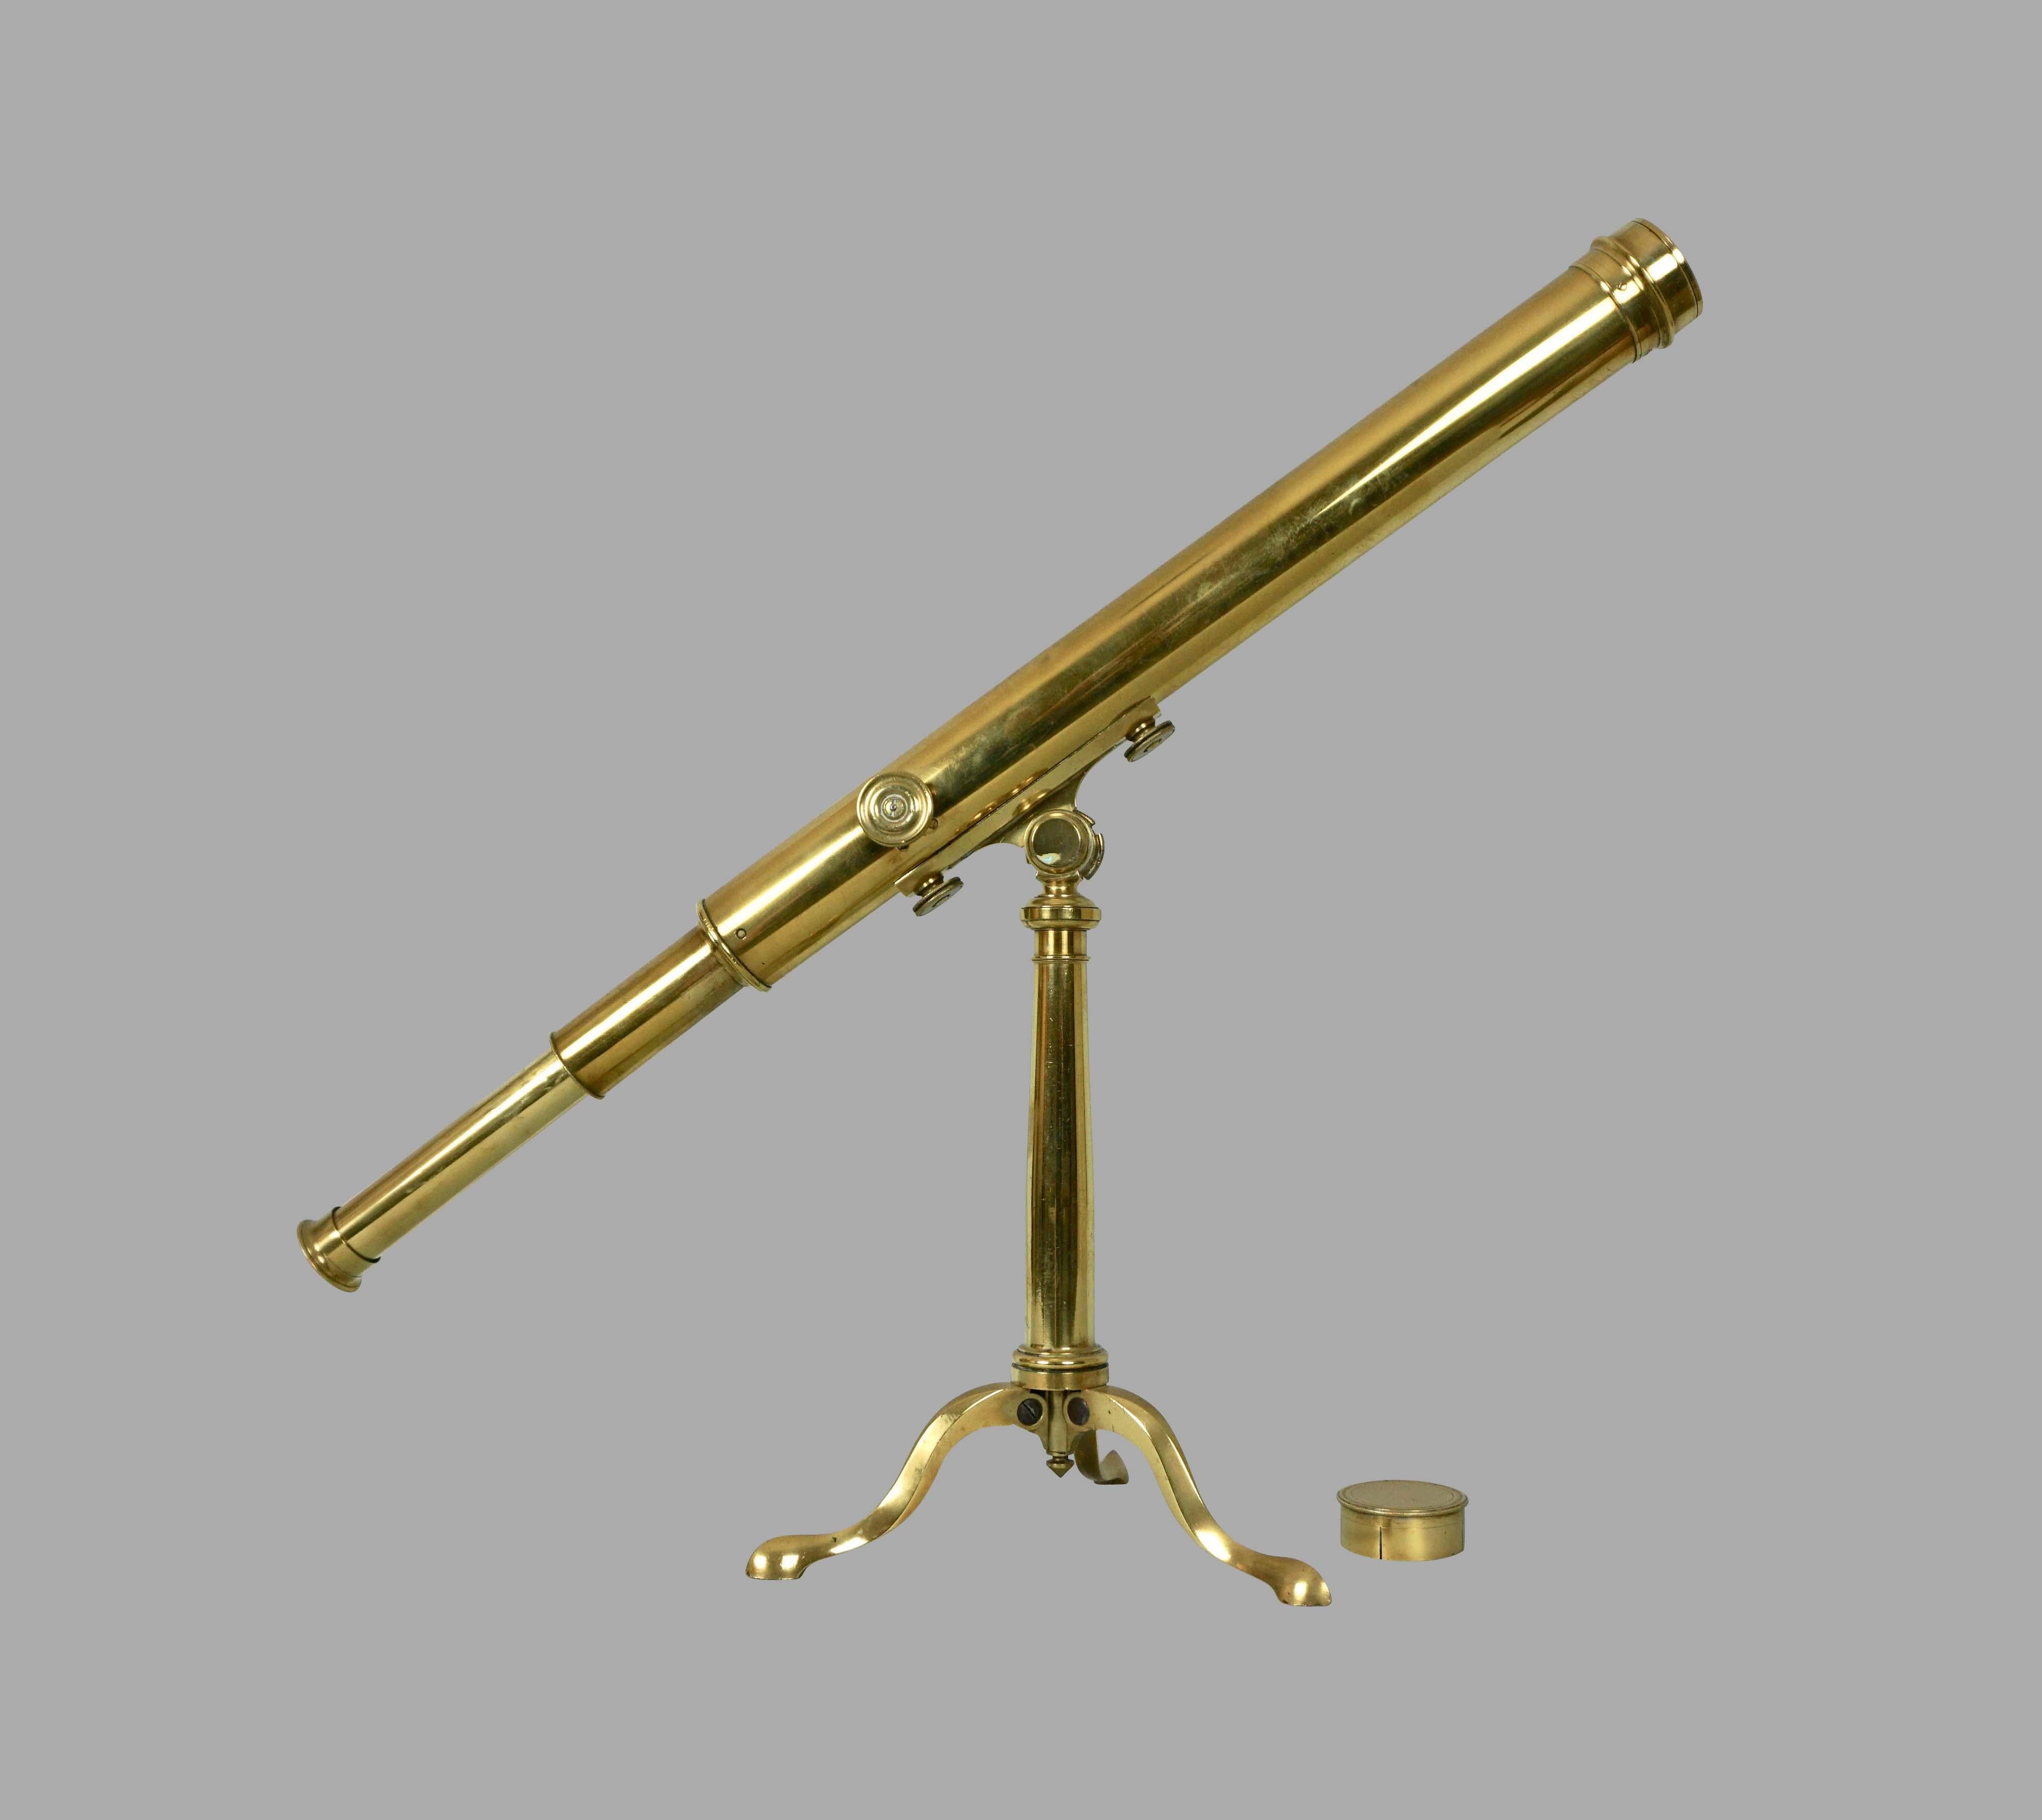 A French 2 inch diameter brass refracting telescope retaining its original tripod, signed on the barrel 